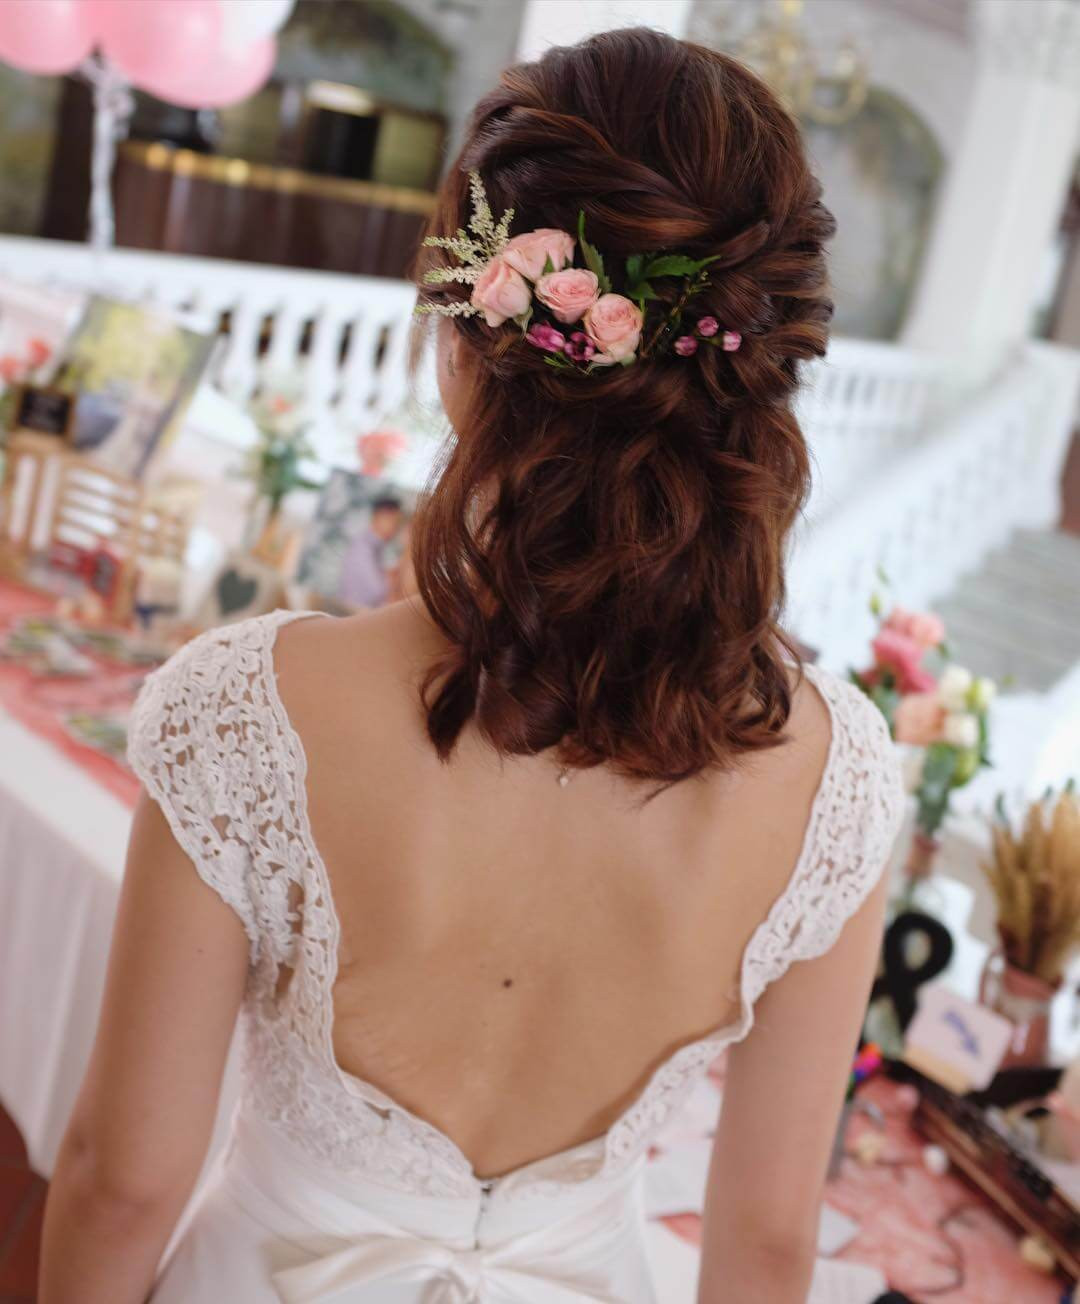 Curly Wedding Hairstyles For Short Hair
 25 Curly Wedding Hairstyle Ideas Designs